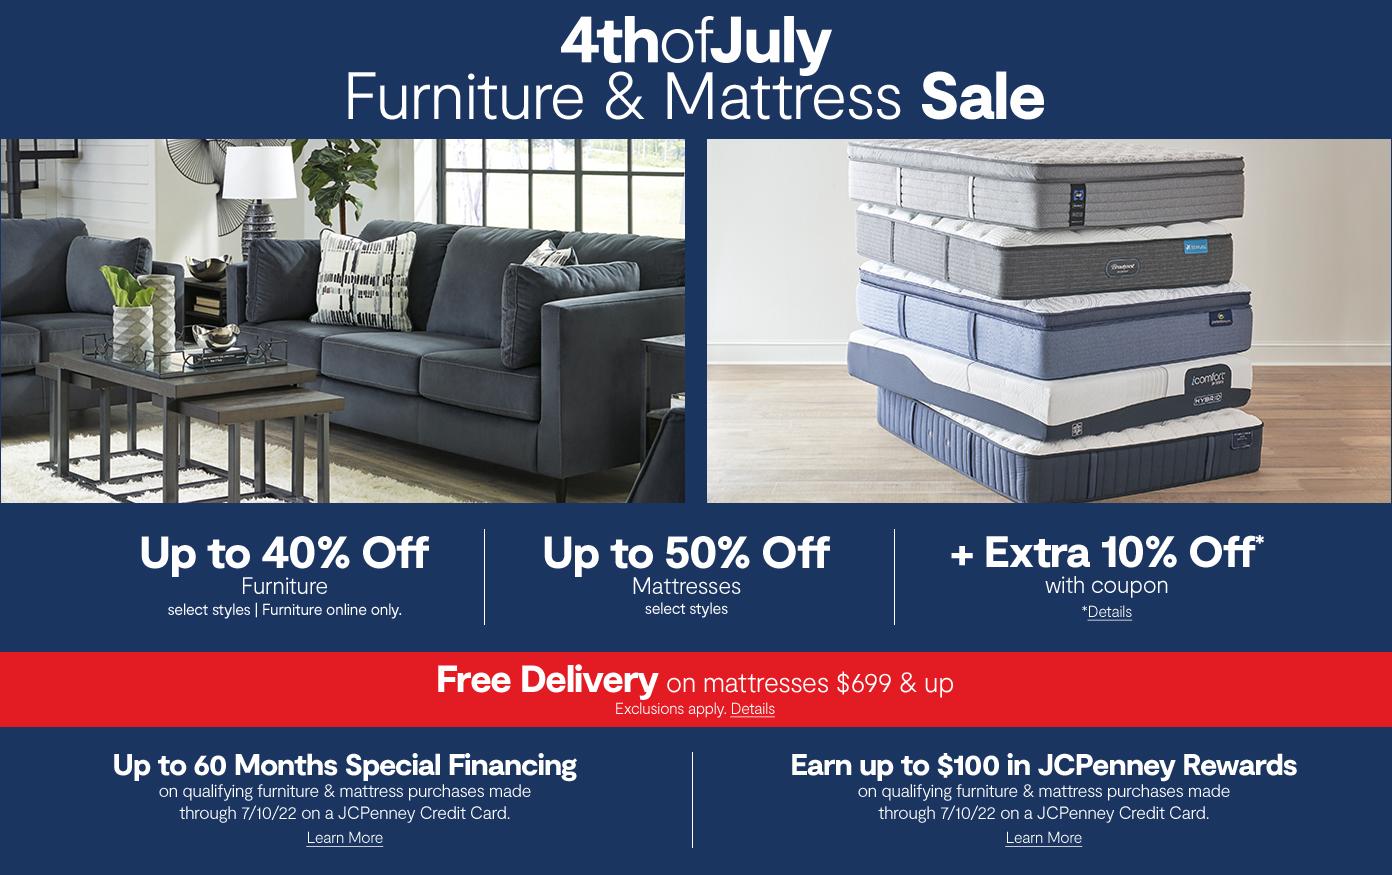 4th of July furniture & mattress sale up to 40% off furniture/ up to 50% off mattresses . free delivery